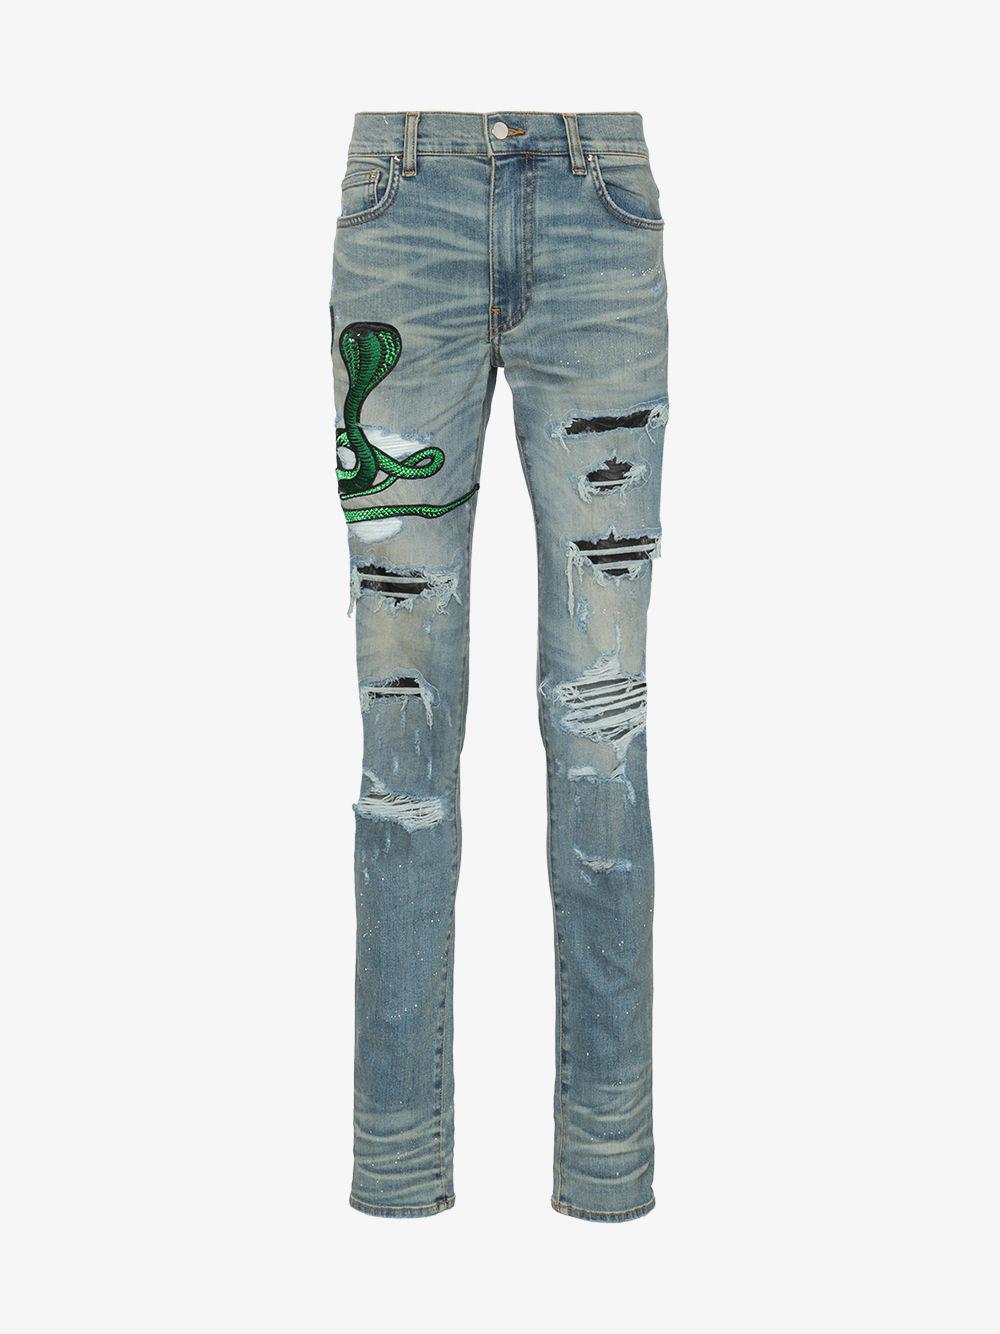 Amiri Denim Snake Patch Embroidered Skinny Jeans in Blue for Men - Lyst